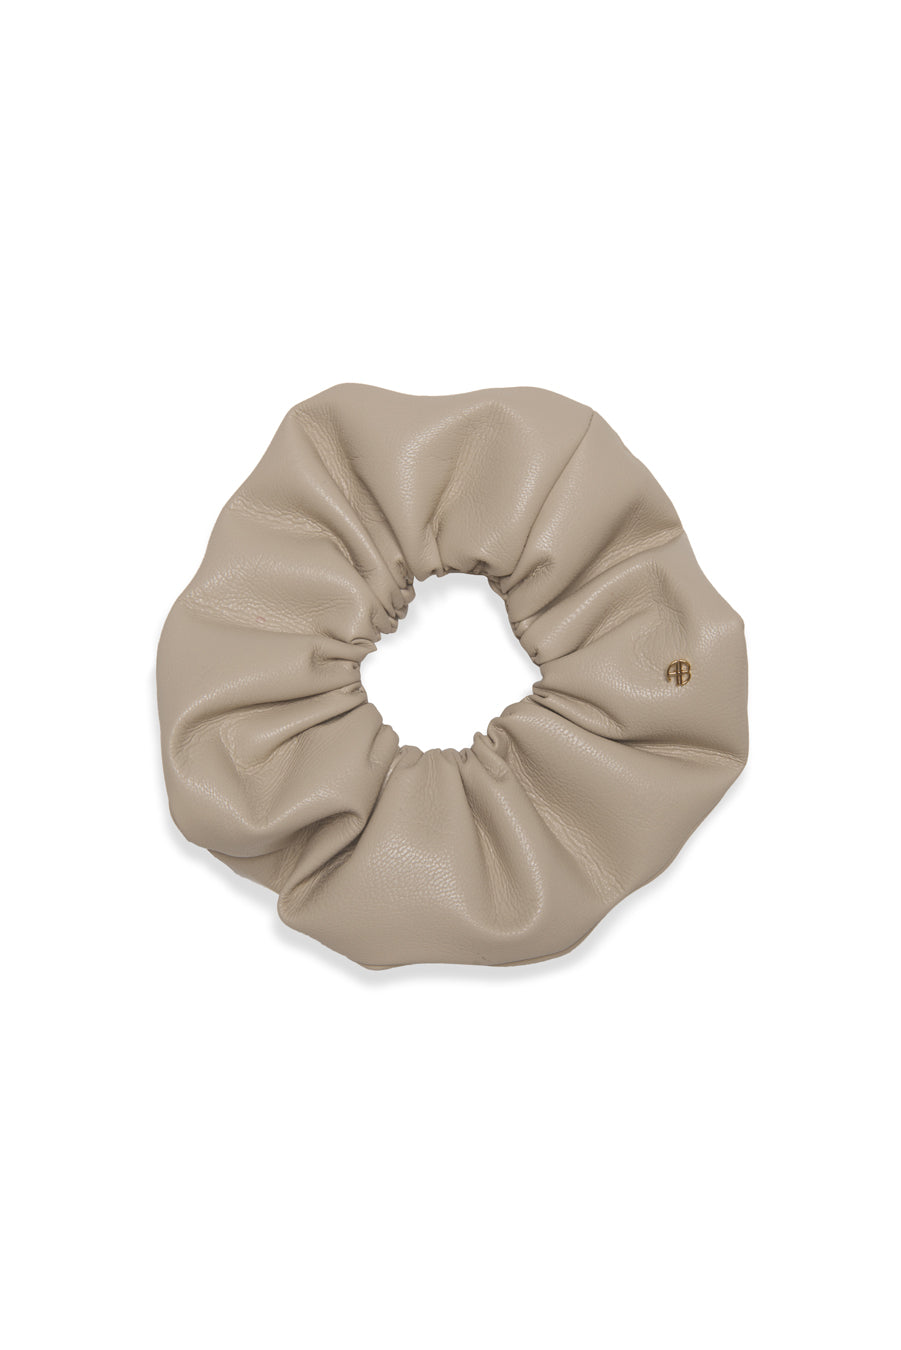 Anine Bing - Large Gwinn Scrunchie Two Pack in Cream Check and Stone